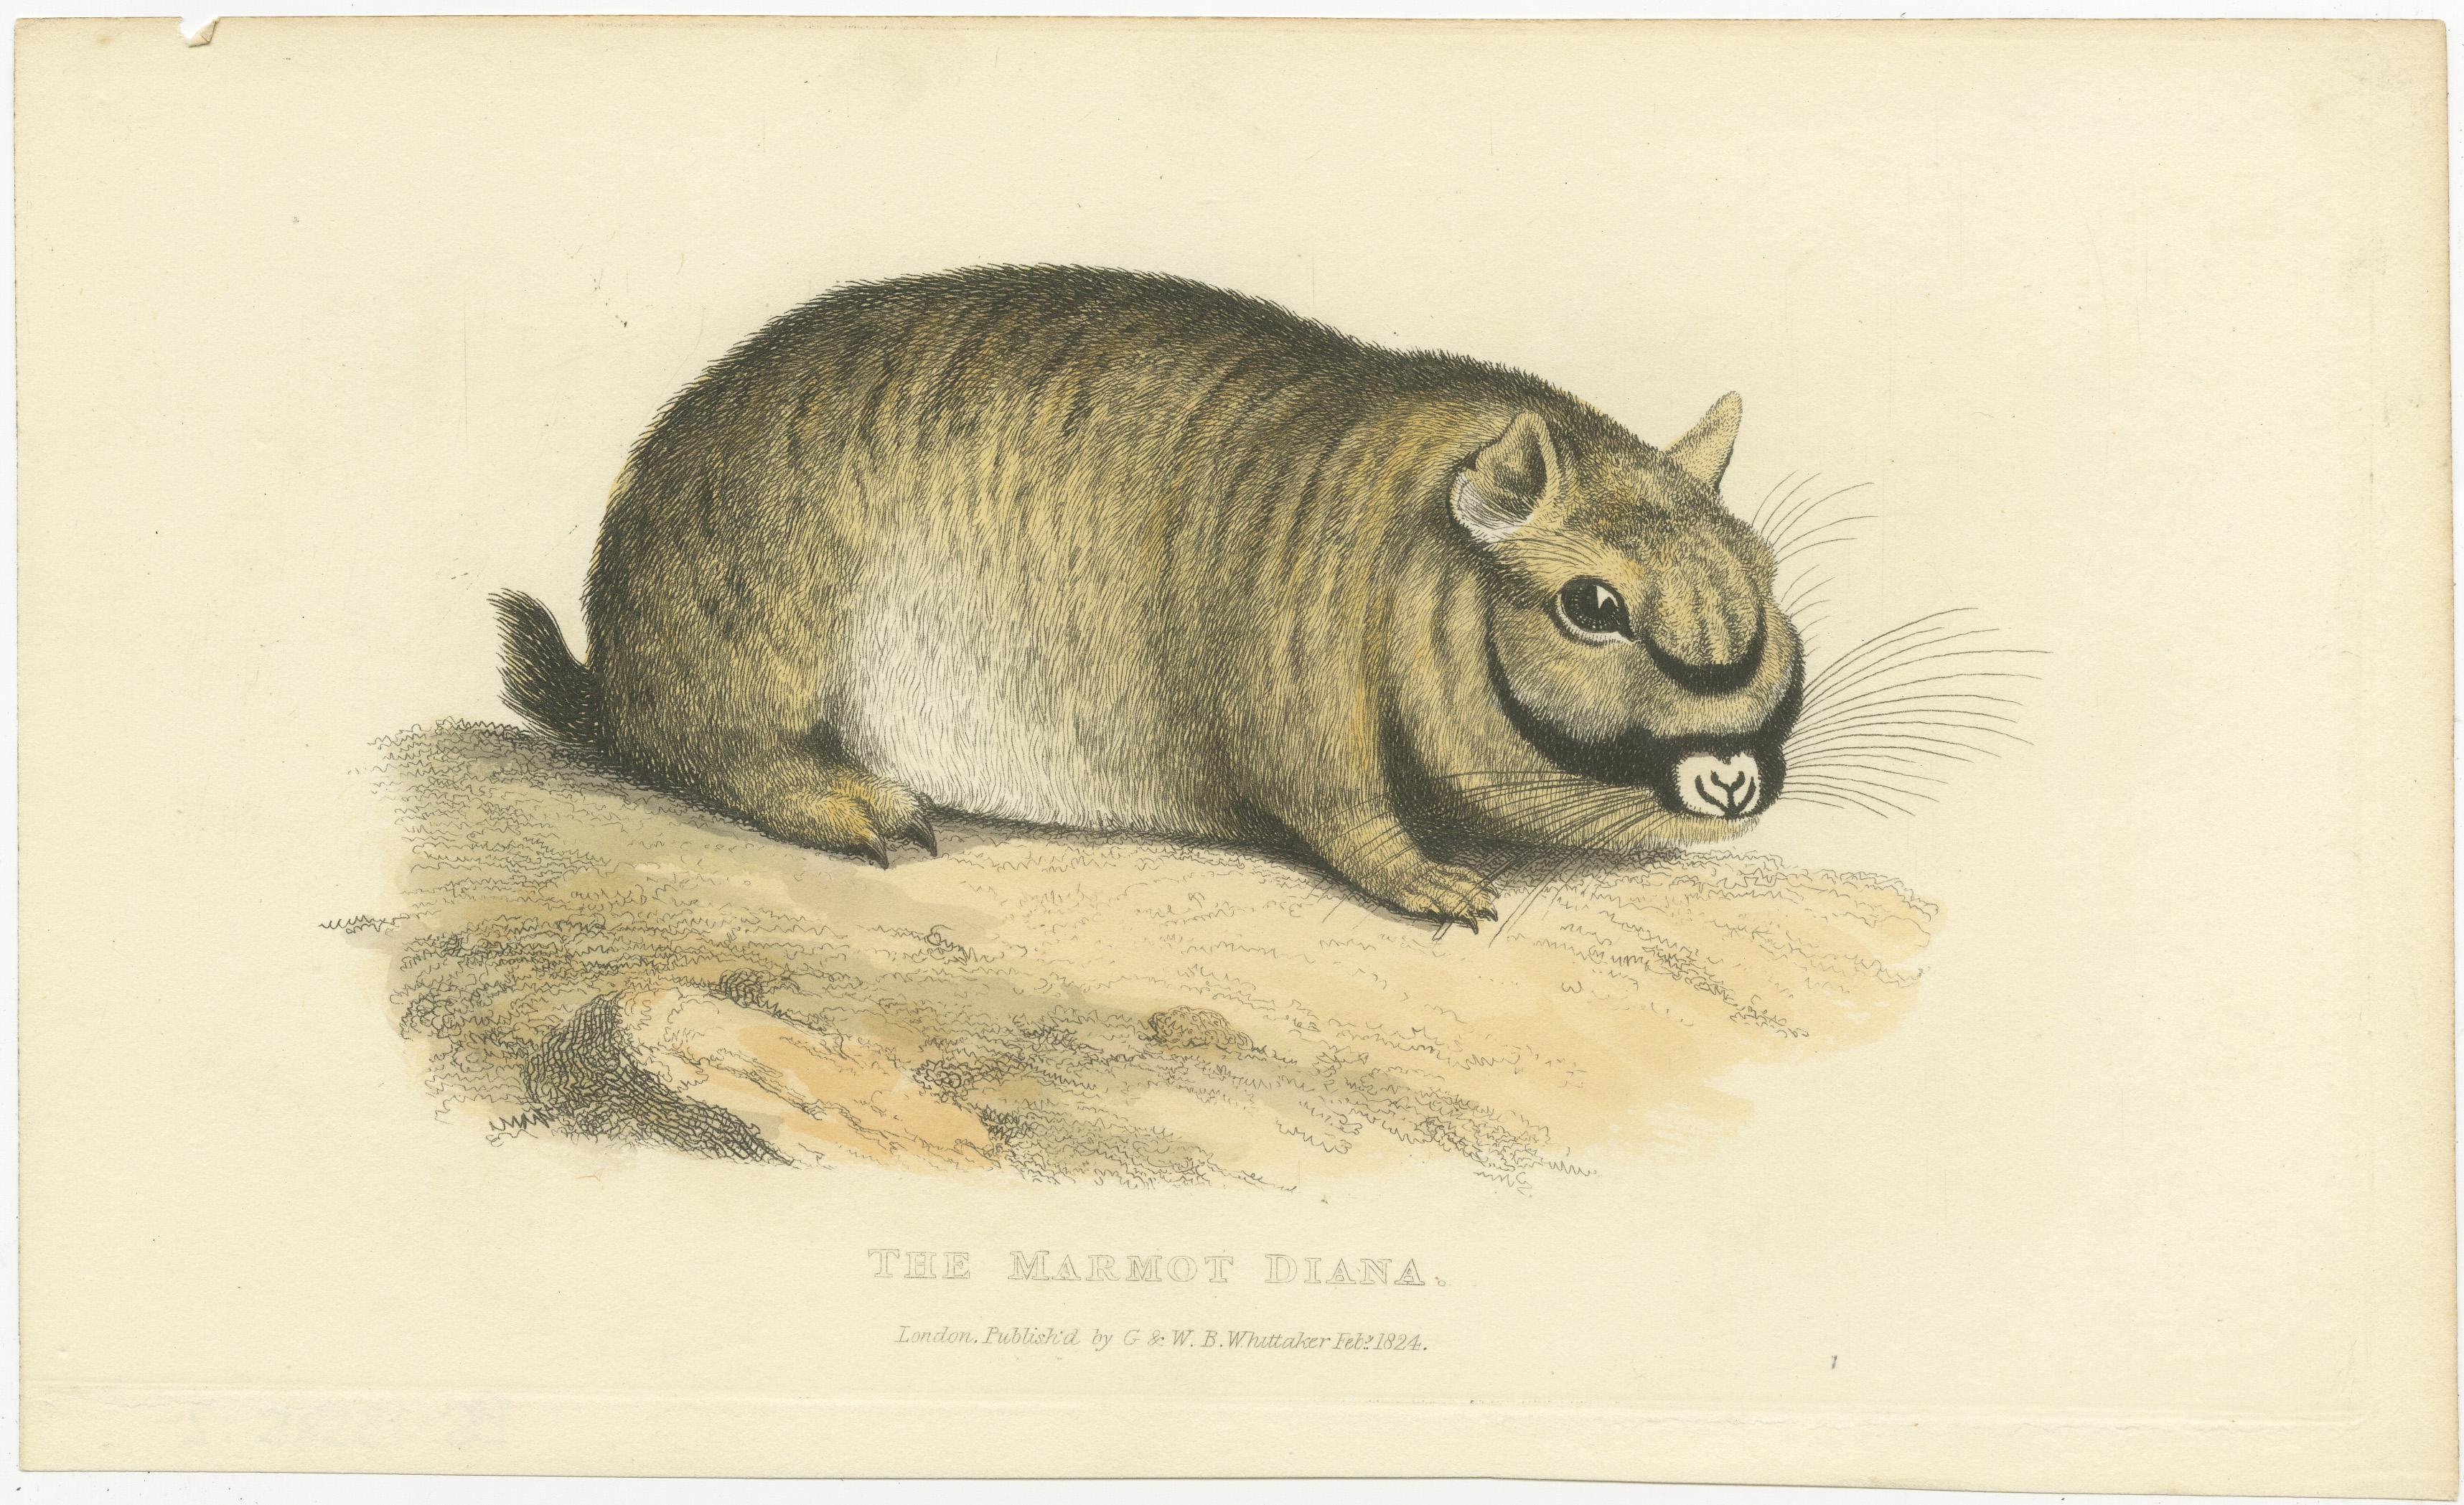 Engraved Original Antique Print of Marmot Diana, an unknown variety of a Groundhog, 1824 For Sale